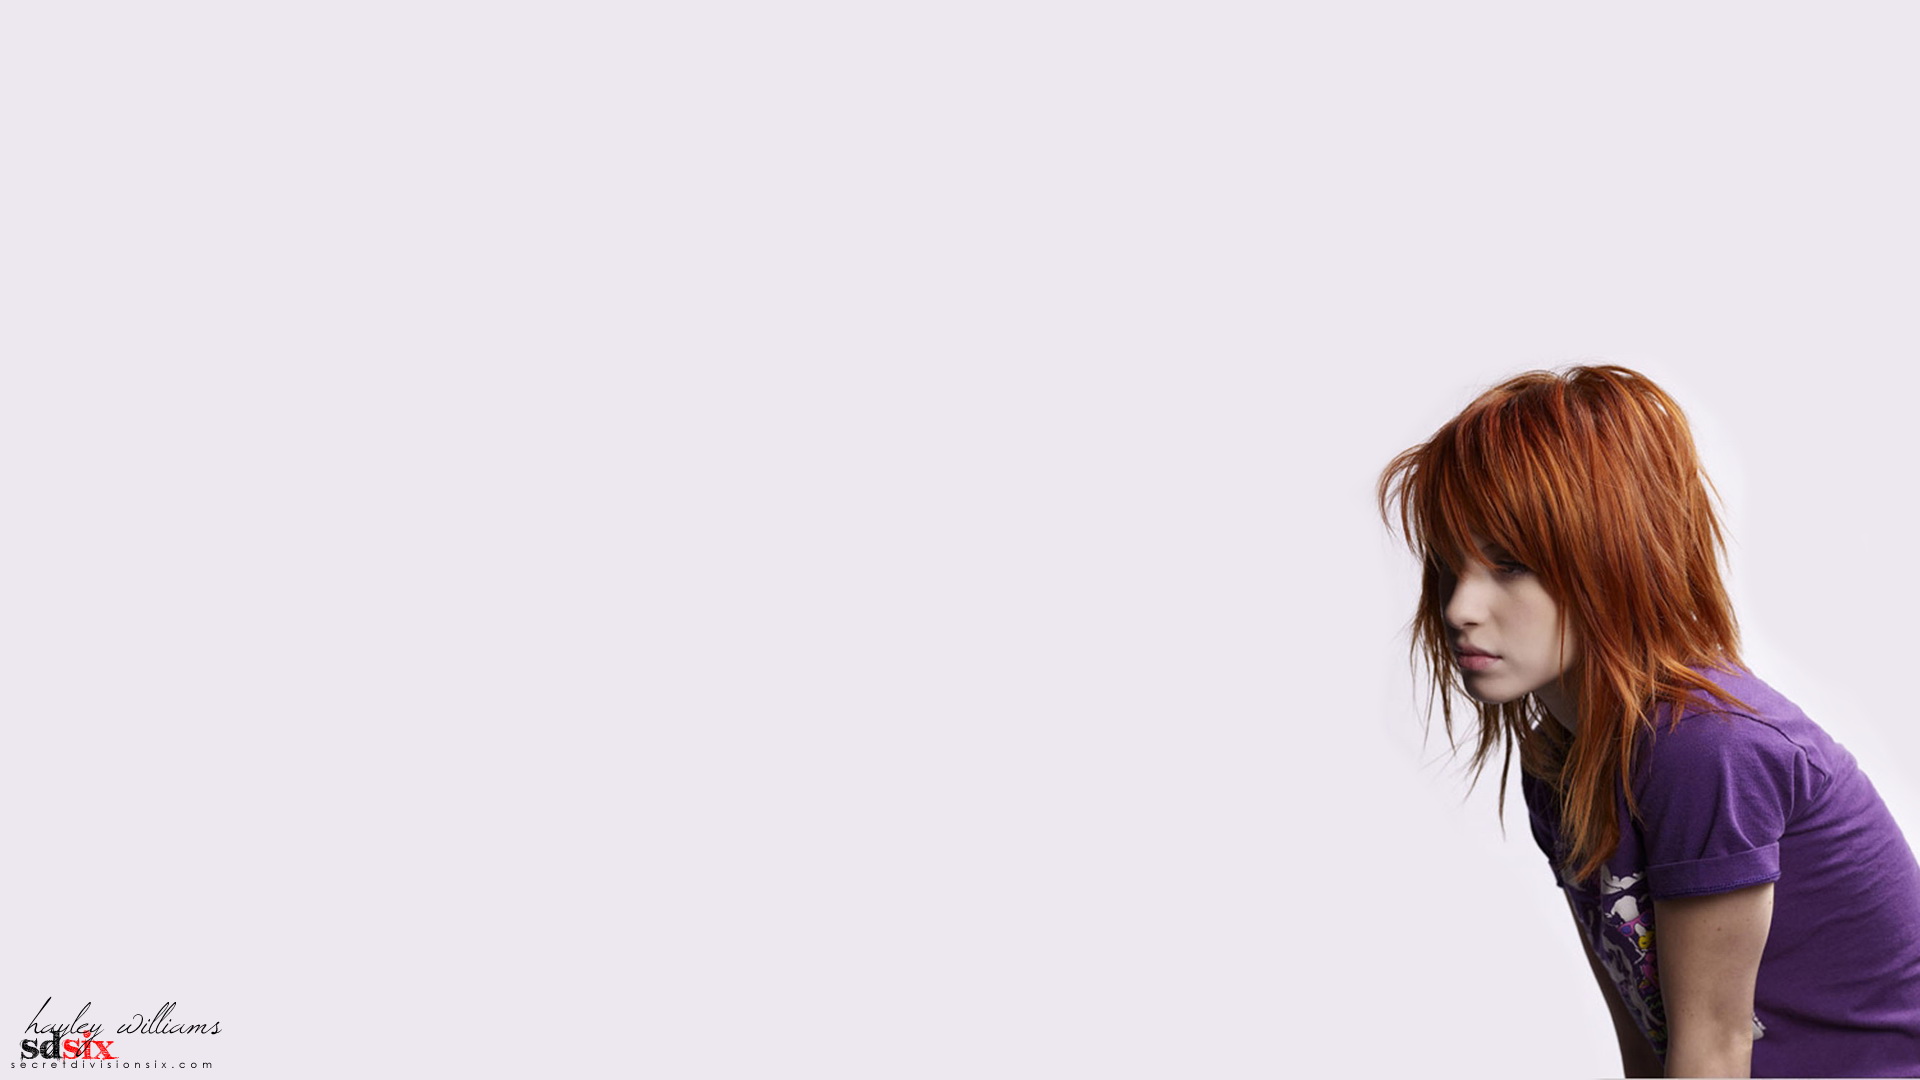 Hayley Williams Woman Paramore Musician 1920x1080